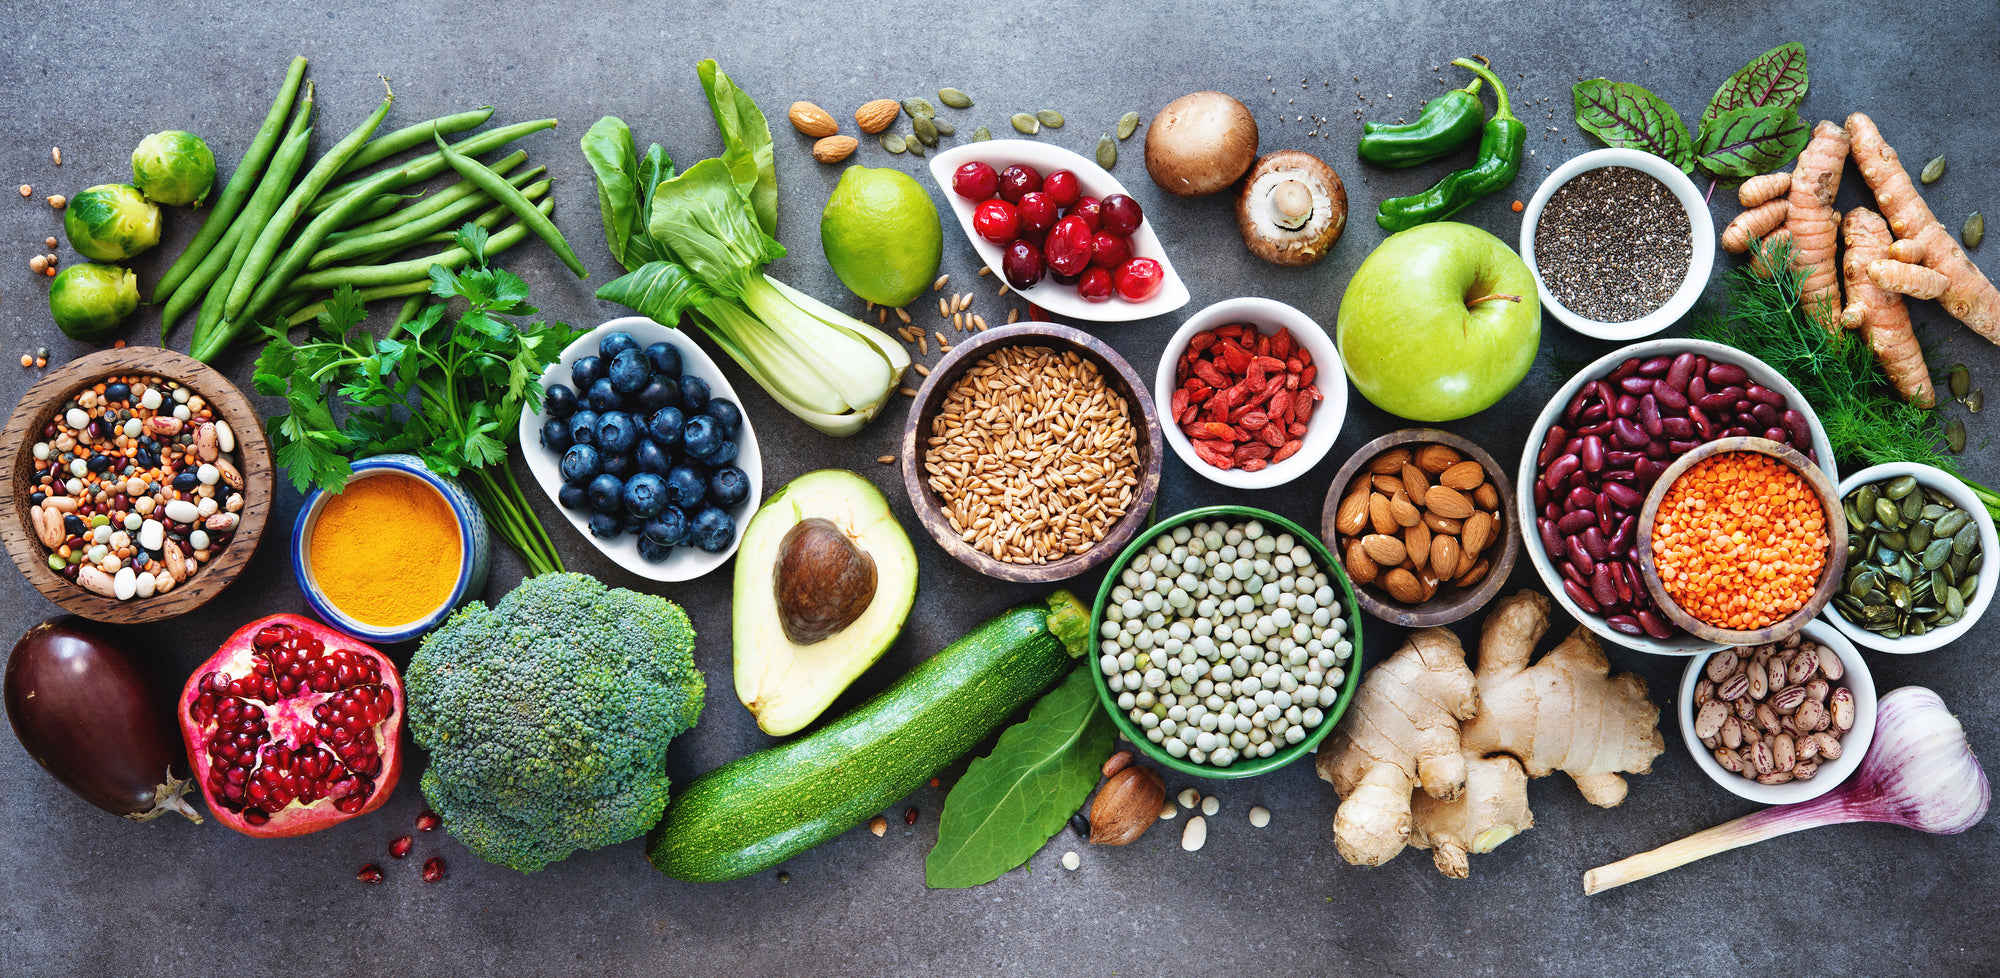 5 Ways Superfoods Improve Your Health and Fitness